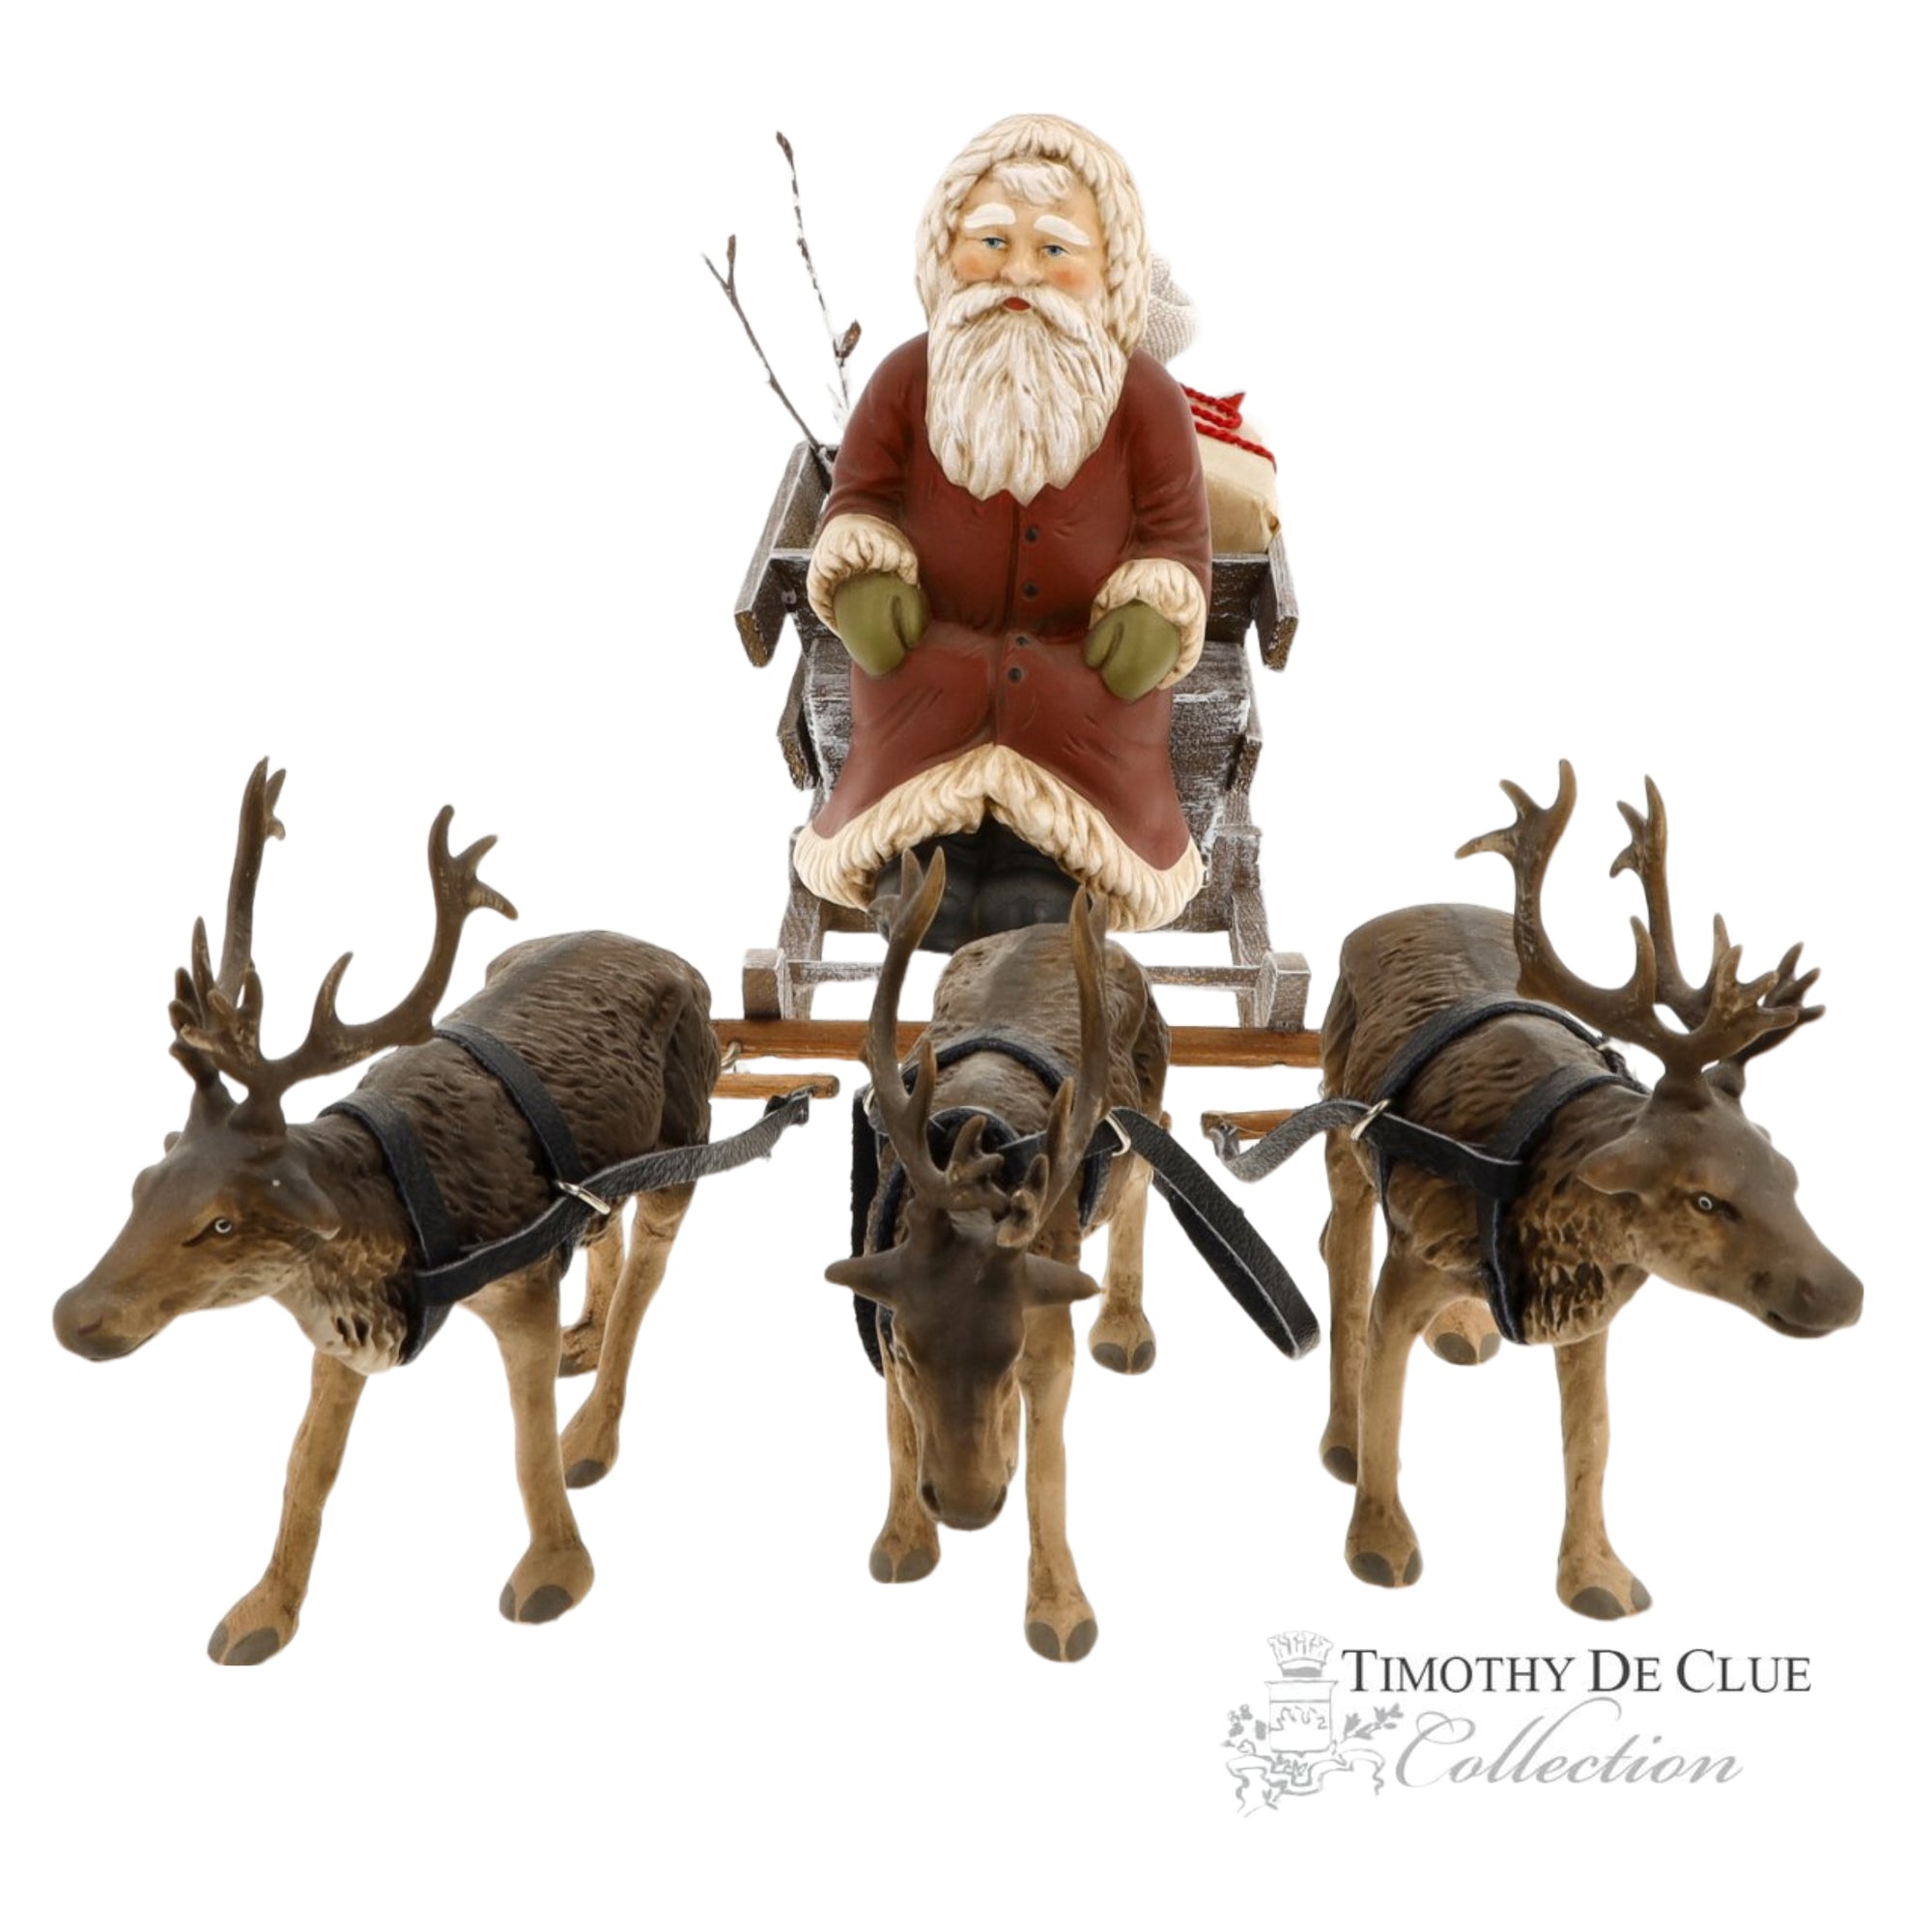  Trio Reindeer Pulling Sleigh Santa Paper Mache | Vintage German Reproduction of 19th Century Piece Timothy De Clue Christmas Collection